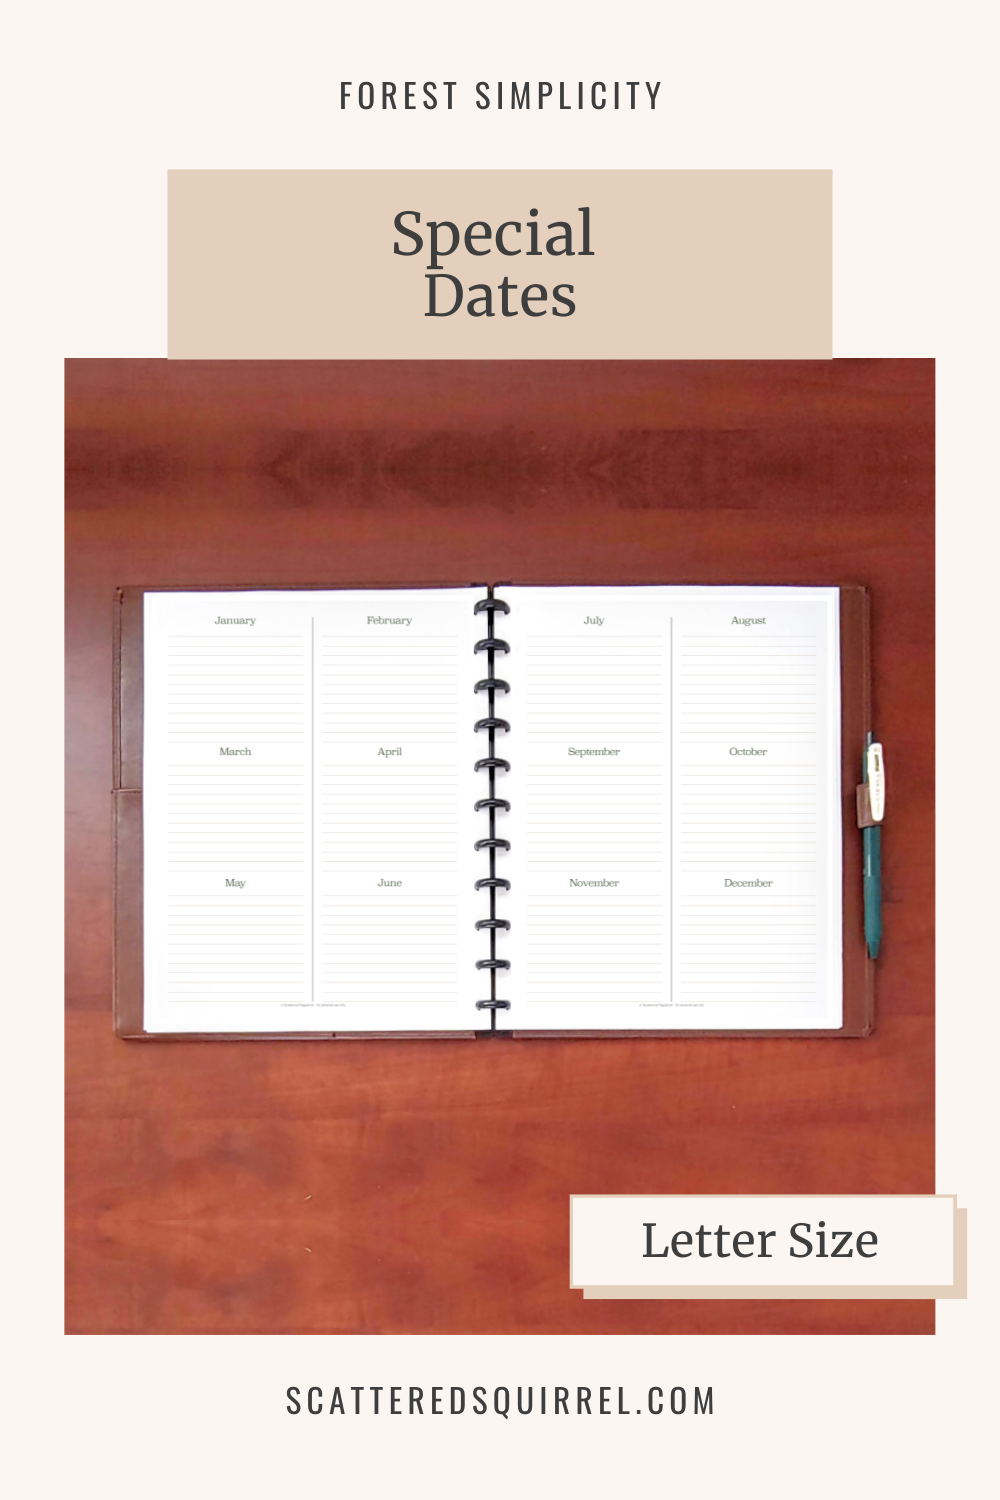 Image says "Forest Simplicity - Special Dates" at the top. Underneath is a picture of a brown leather planner lying open on a wooden desk. The pages are each divided into two columns with three sections in each column. Each section is labeled with a month and under is a series of lines. This image links to the Letter Size Special Dates PDF that can be downloaded.